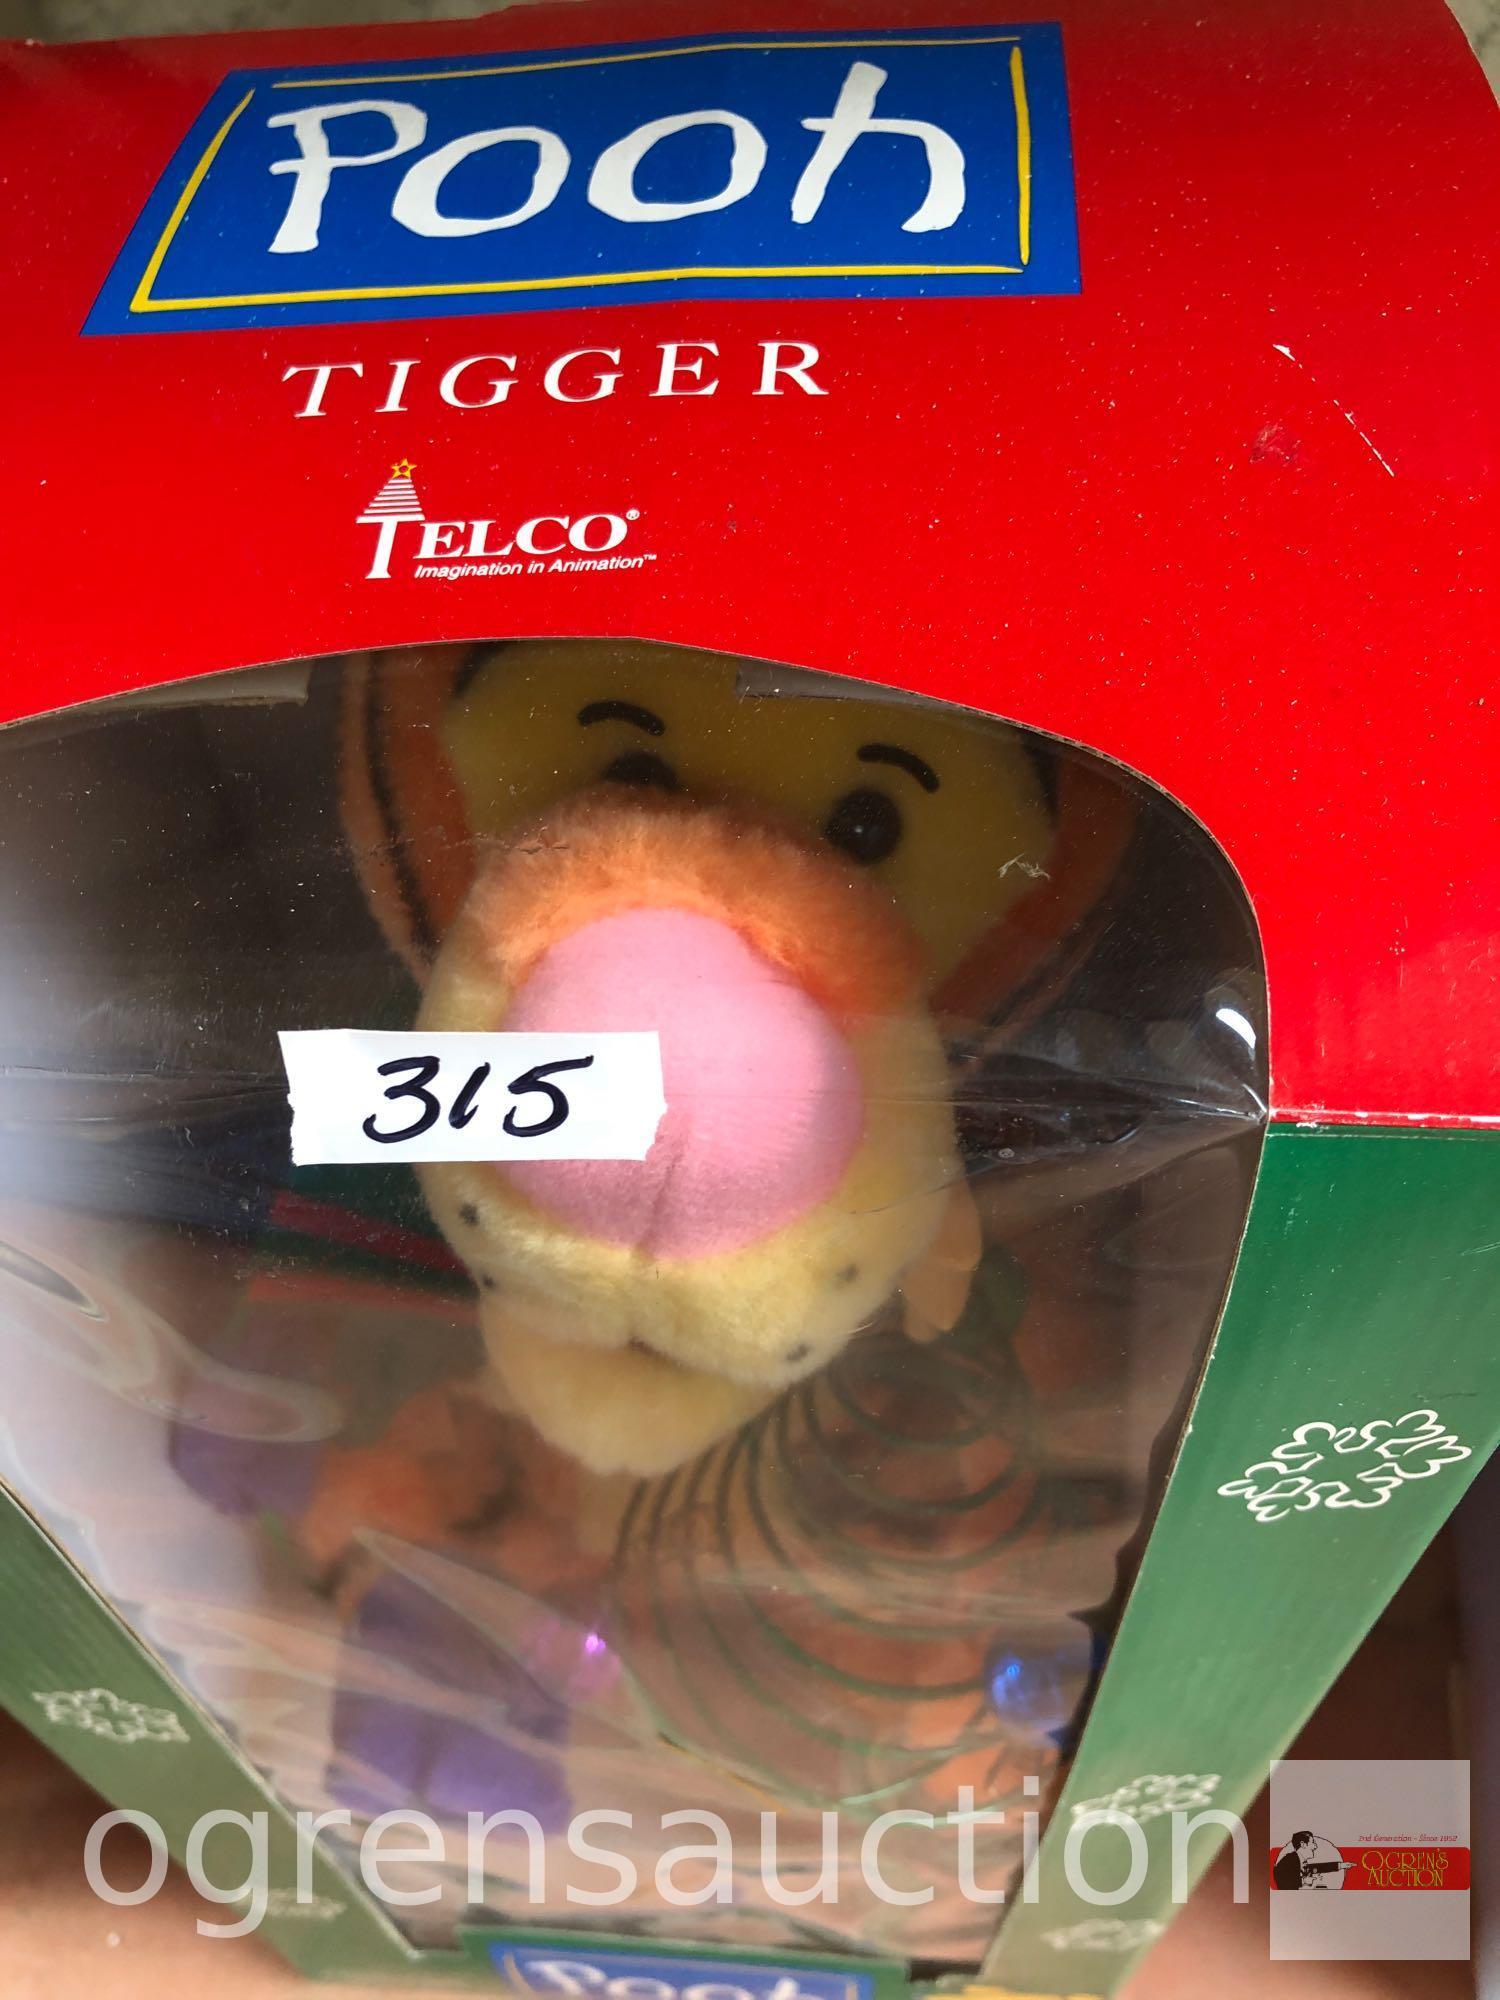 Christmas animated display figure - Pooh "Tigger", new in box, 16"h